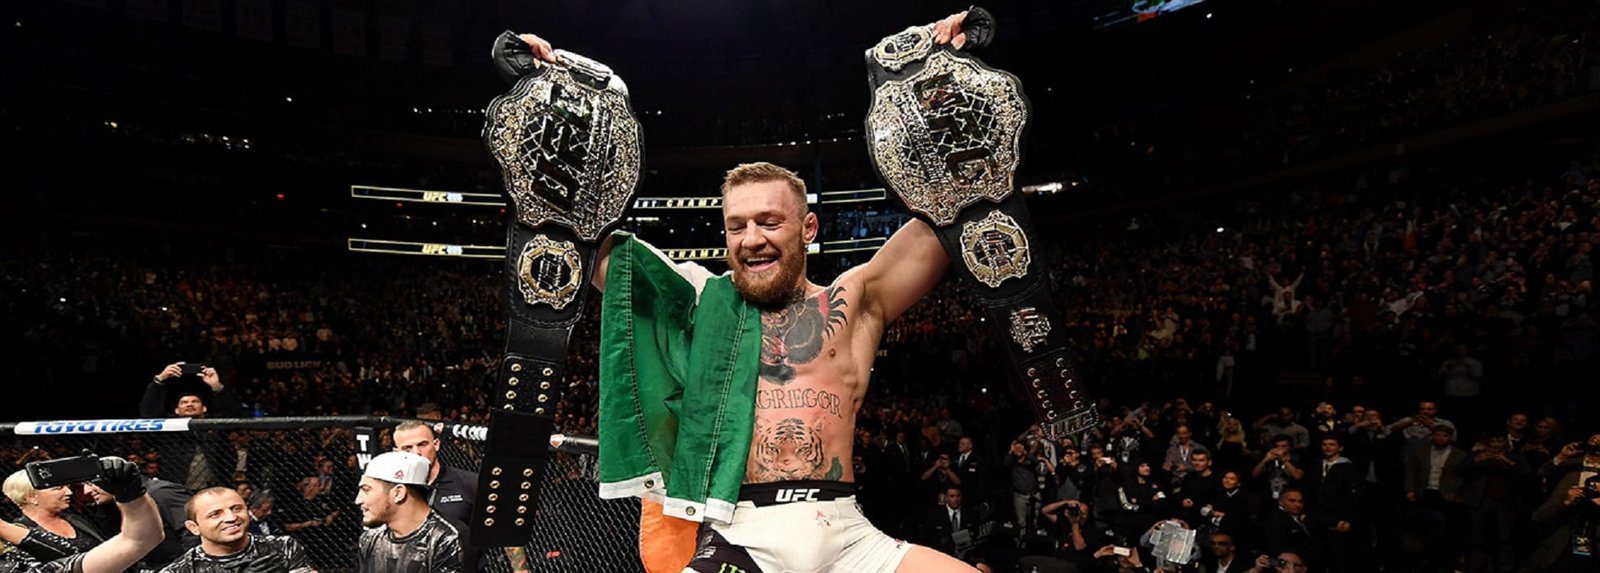 Conor McGregor 2 belts cover